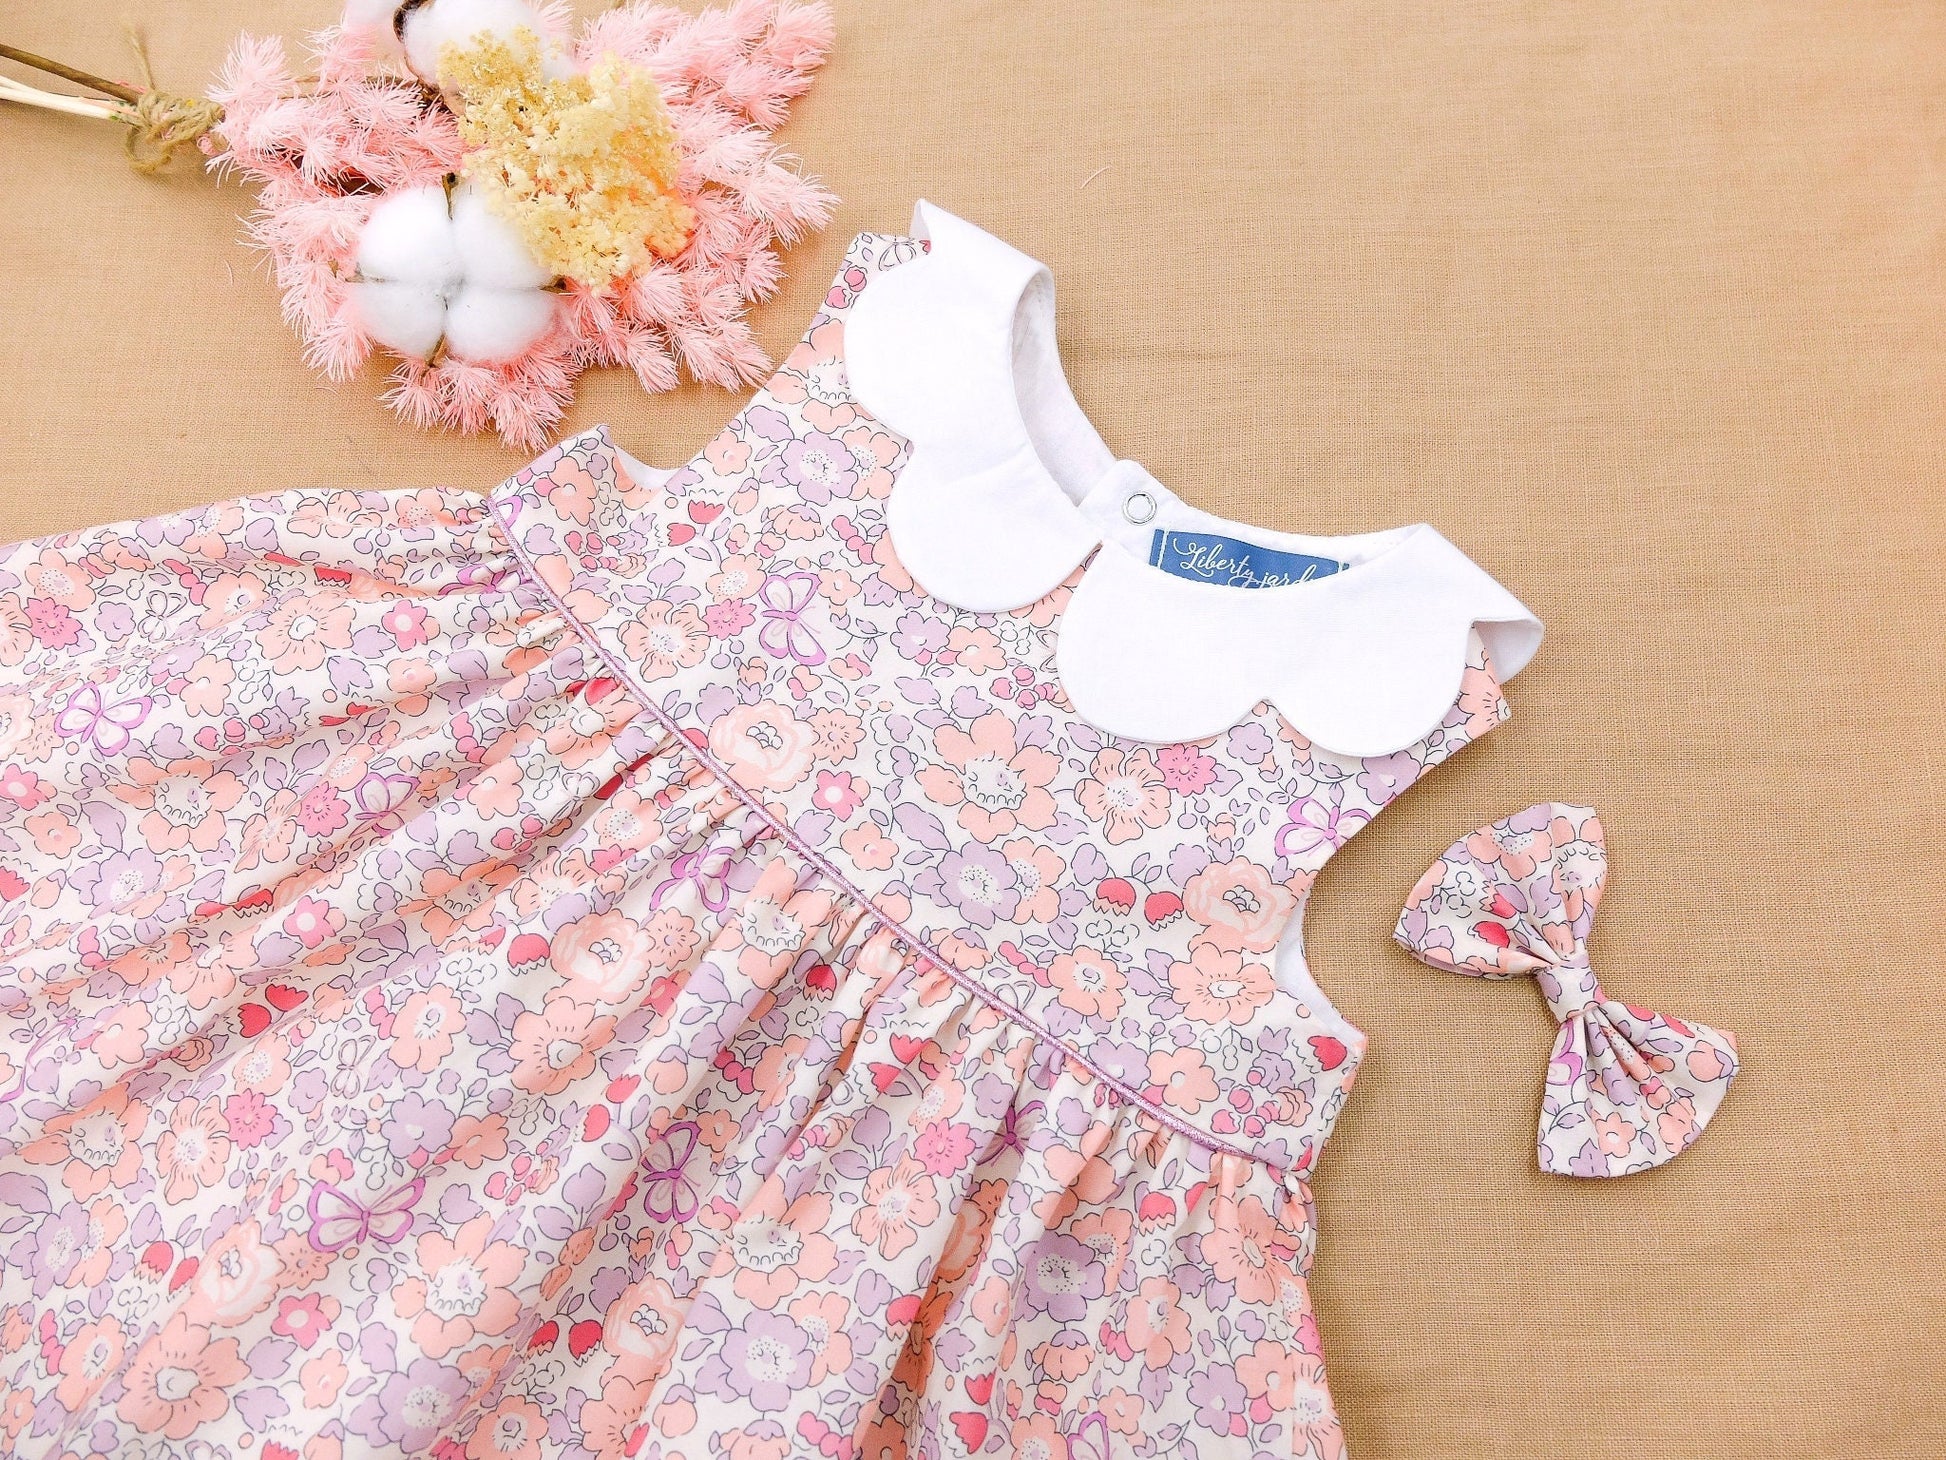 Liberty of London little girl dress organic cotton, floral animal print wedding baptism christening baby outfits first birthday long sleeves short sleeves, eastern thanksgiving halloween Christmas gift new born ruffle Peter Pan scalloped petal collar